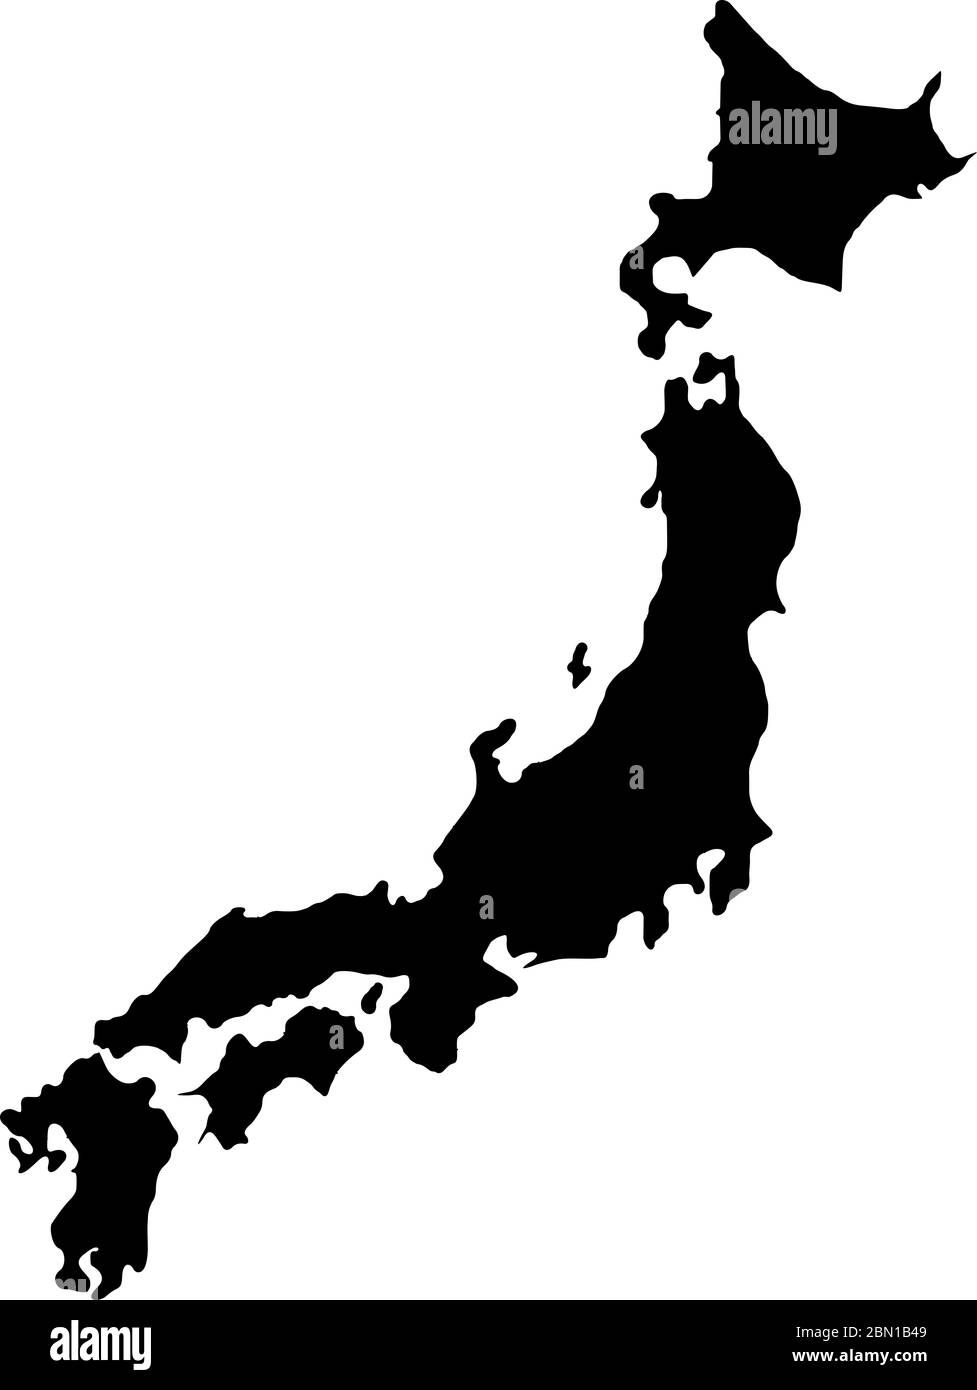 Map of Japan filled with black color Stock Photo